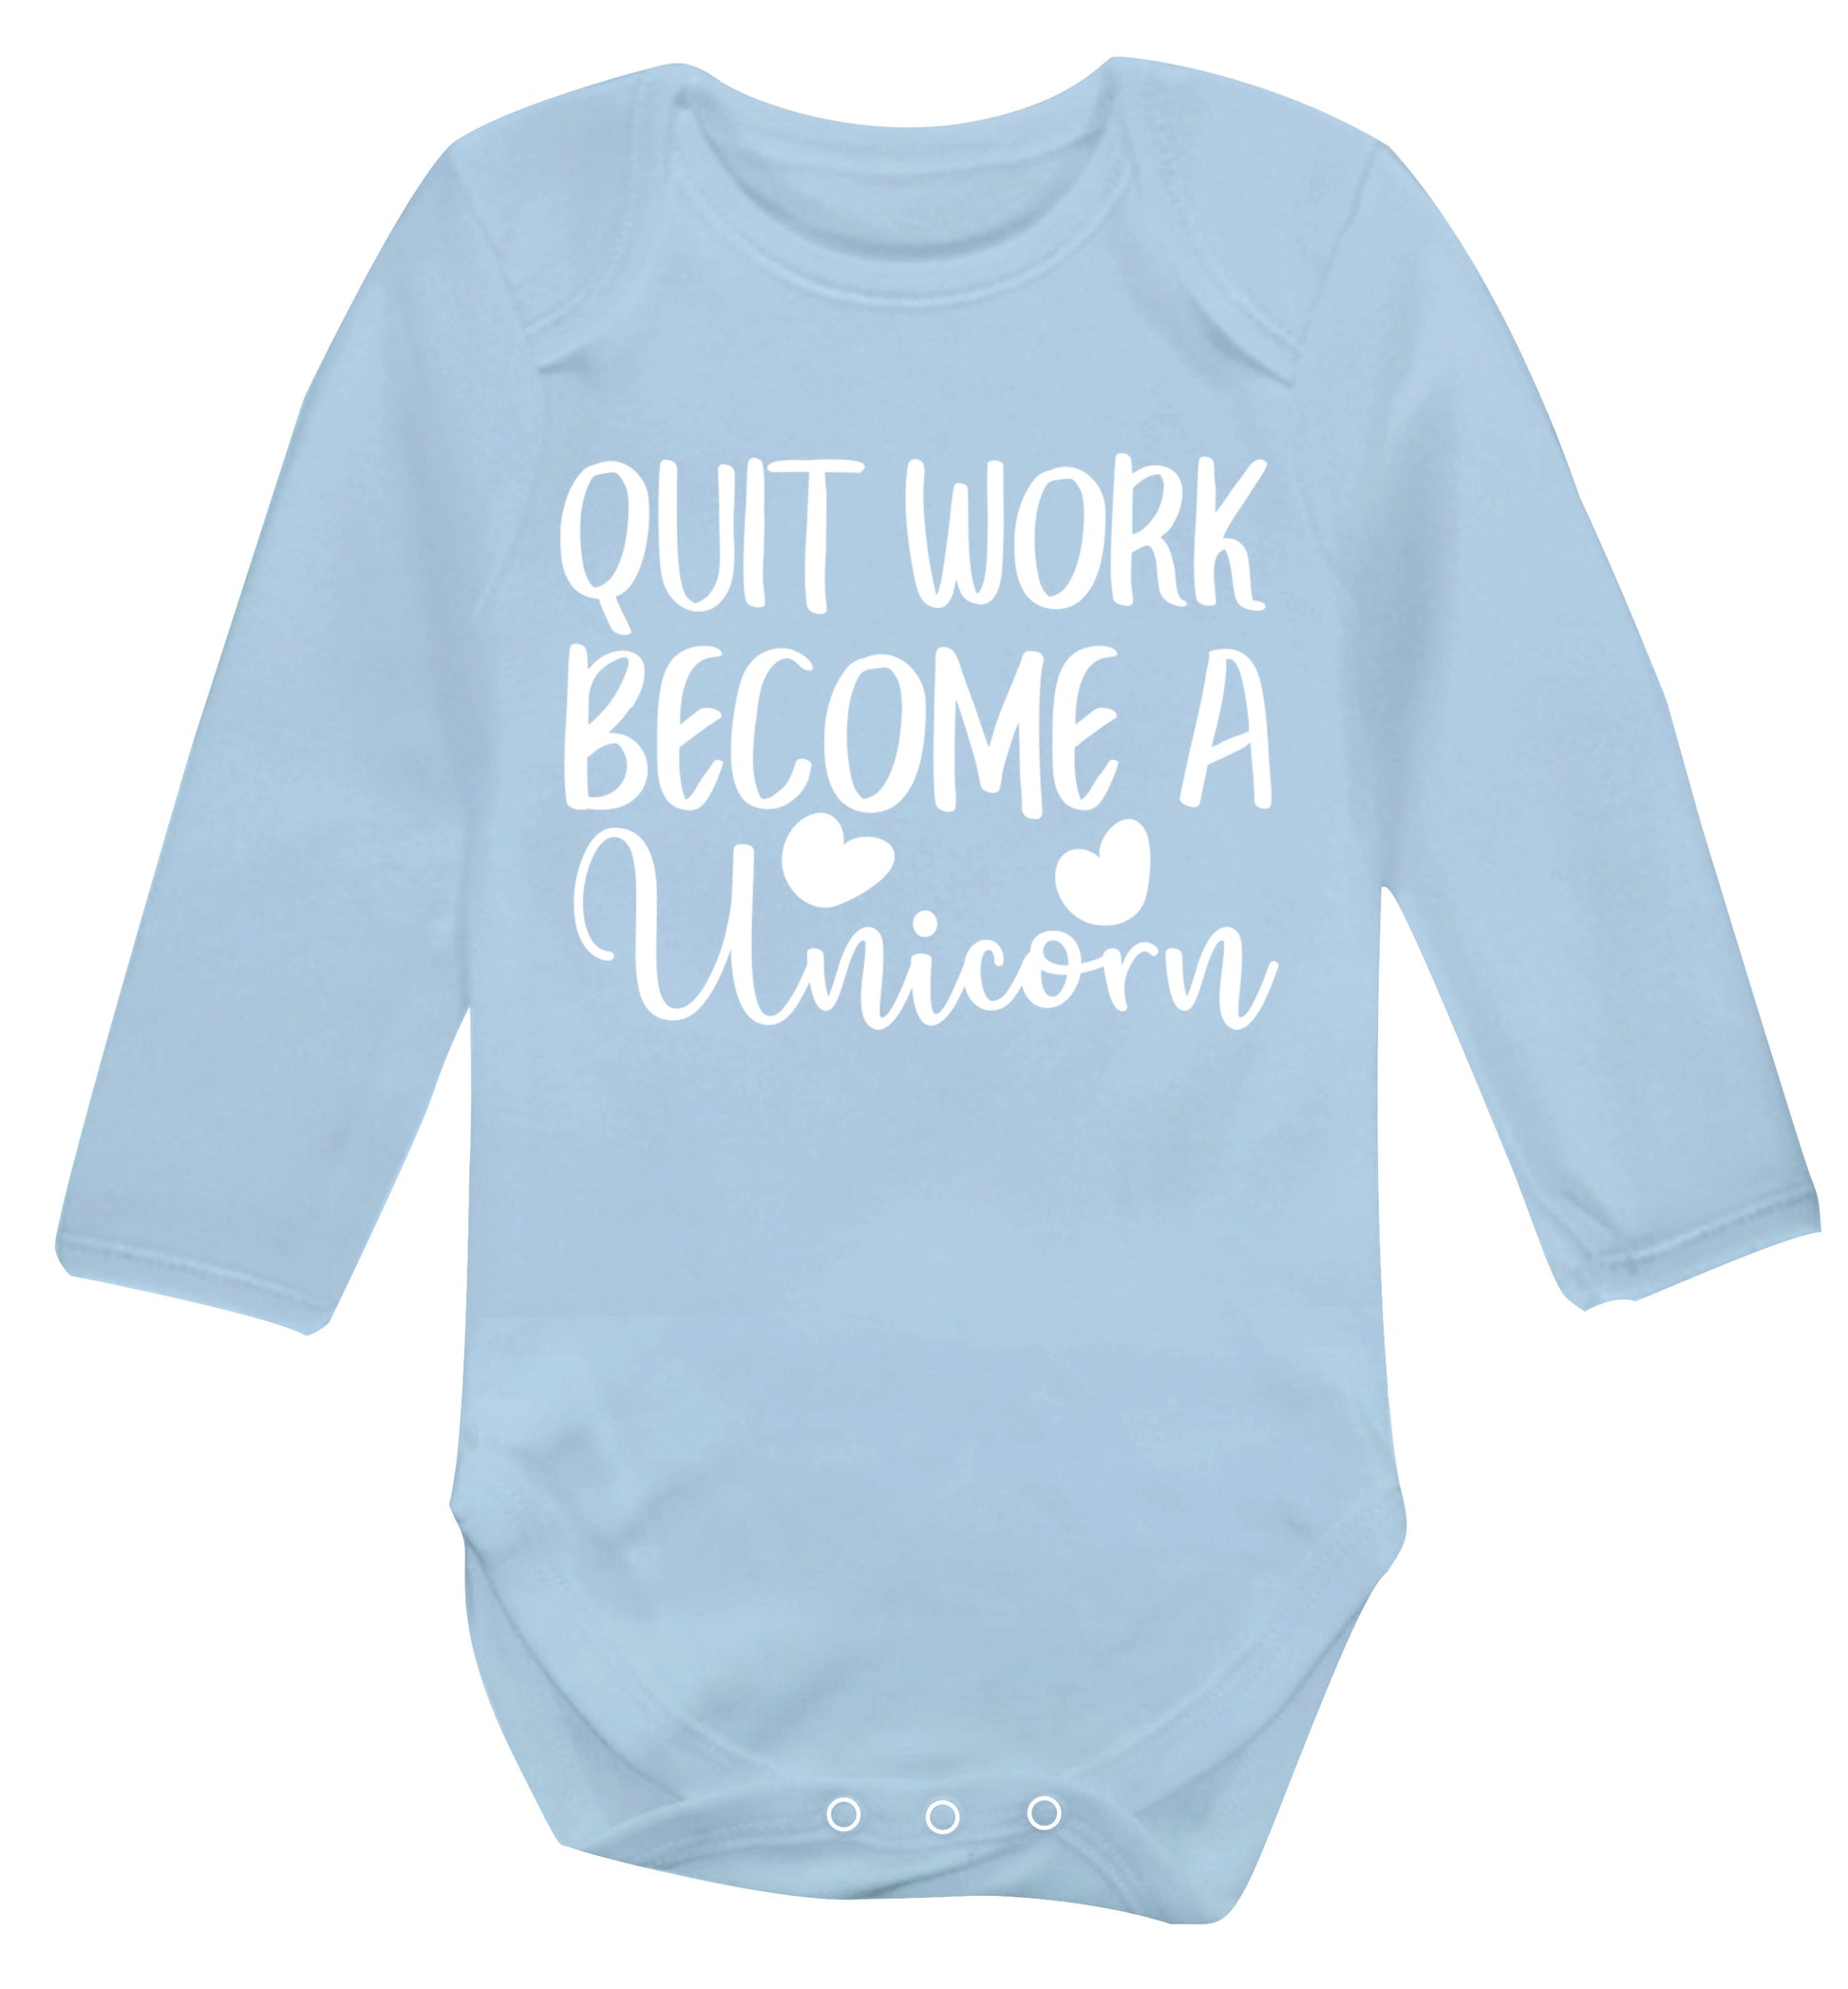 Quit work become a unicorn Baby Vest long sleeved pale blue 6-12 months